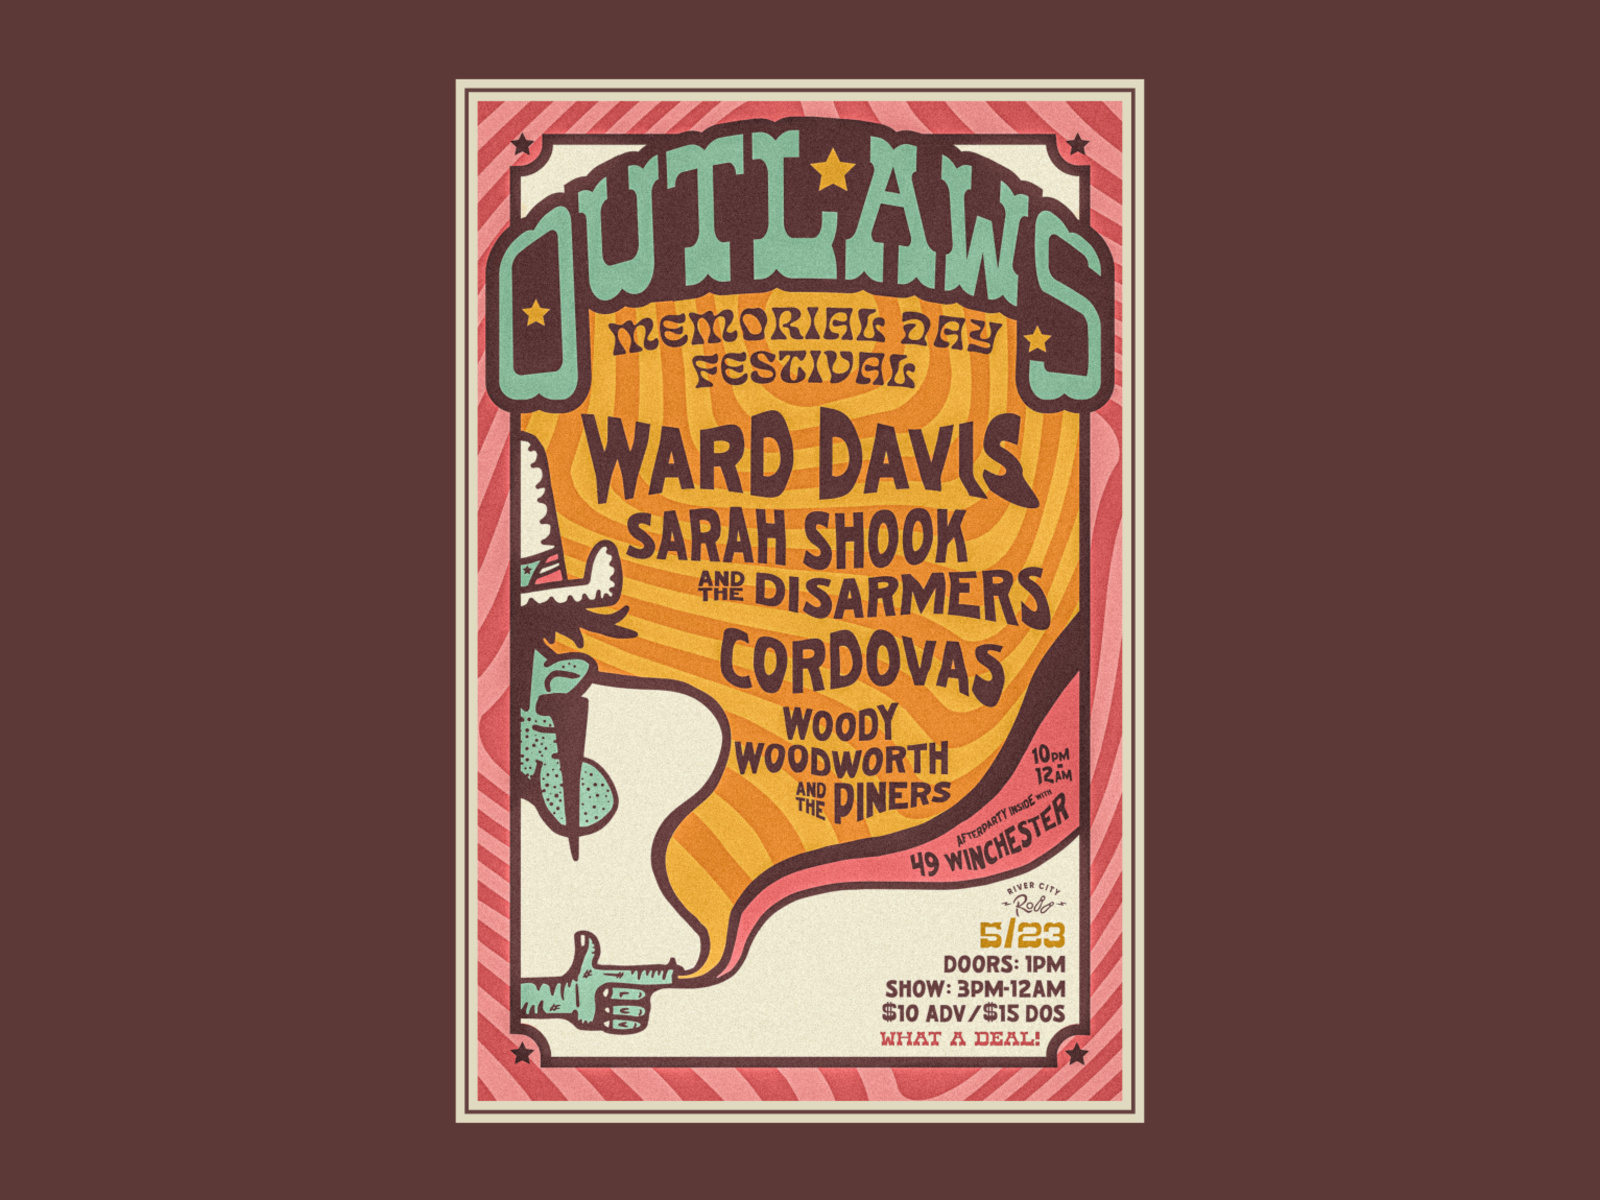 Outlaw Festival Poster by Logan Hall on Dribbble